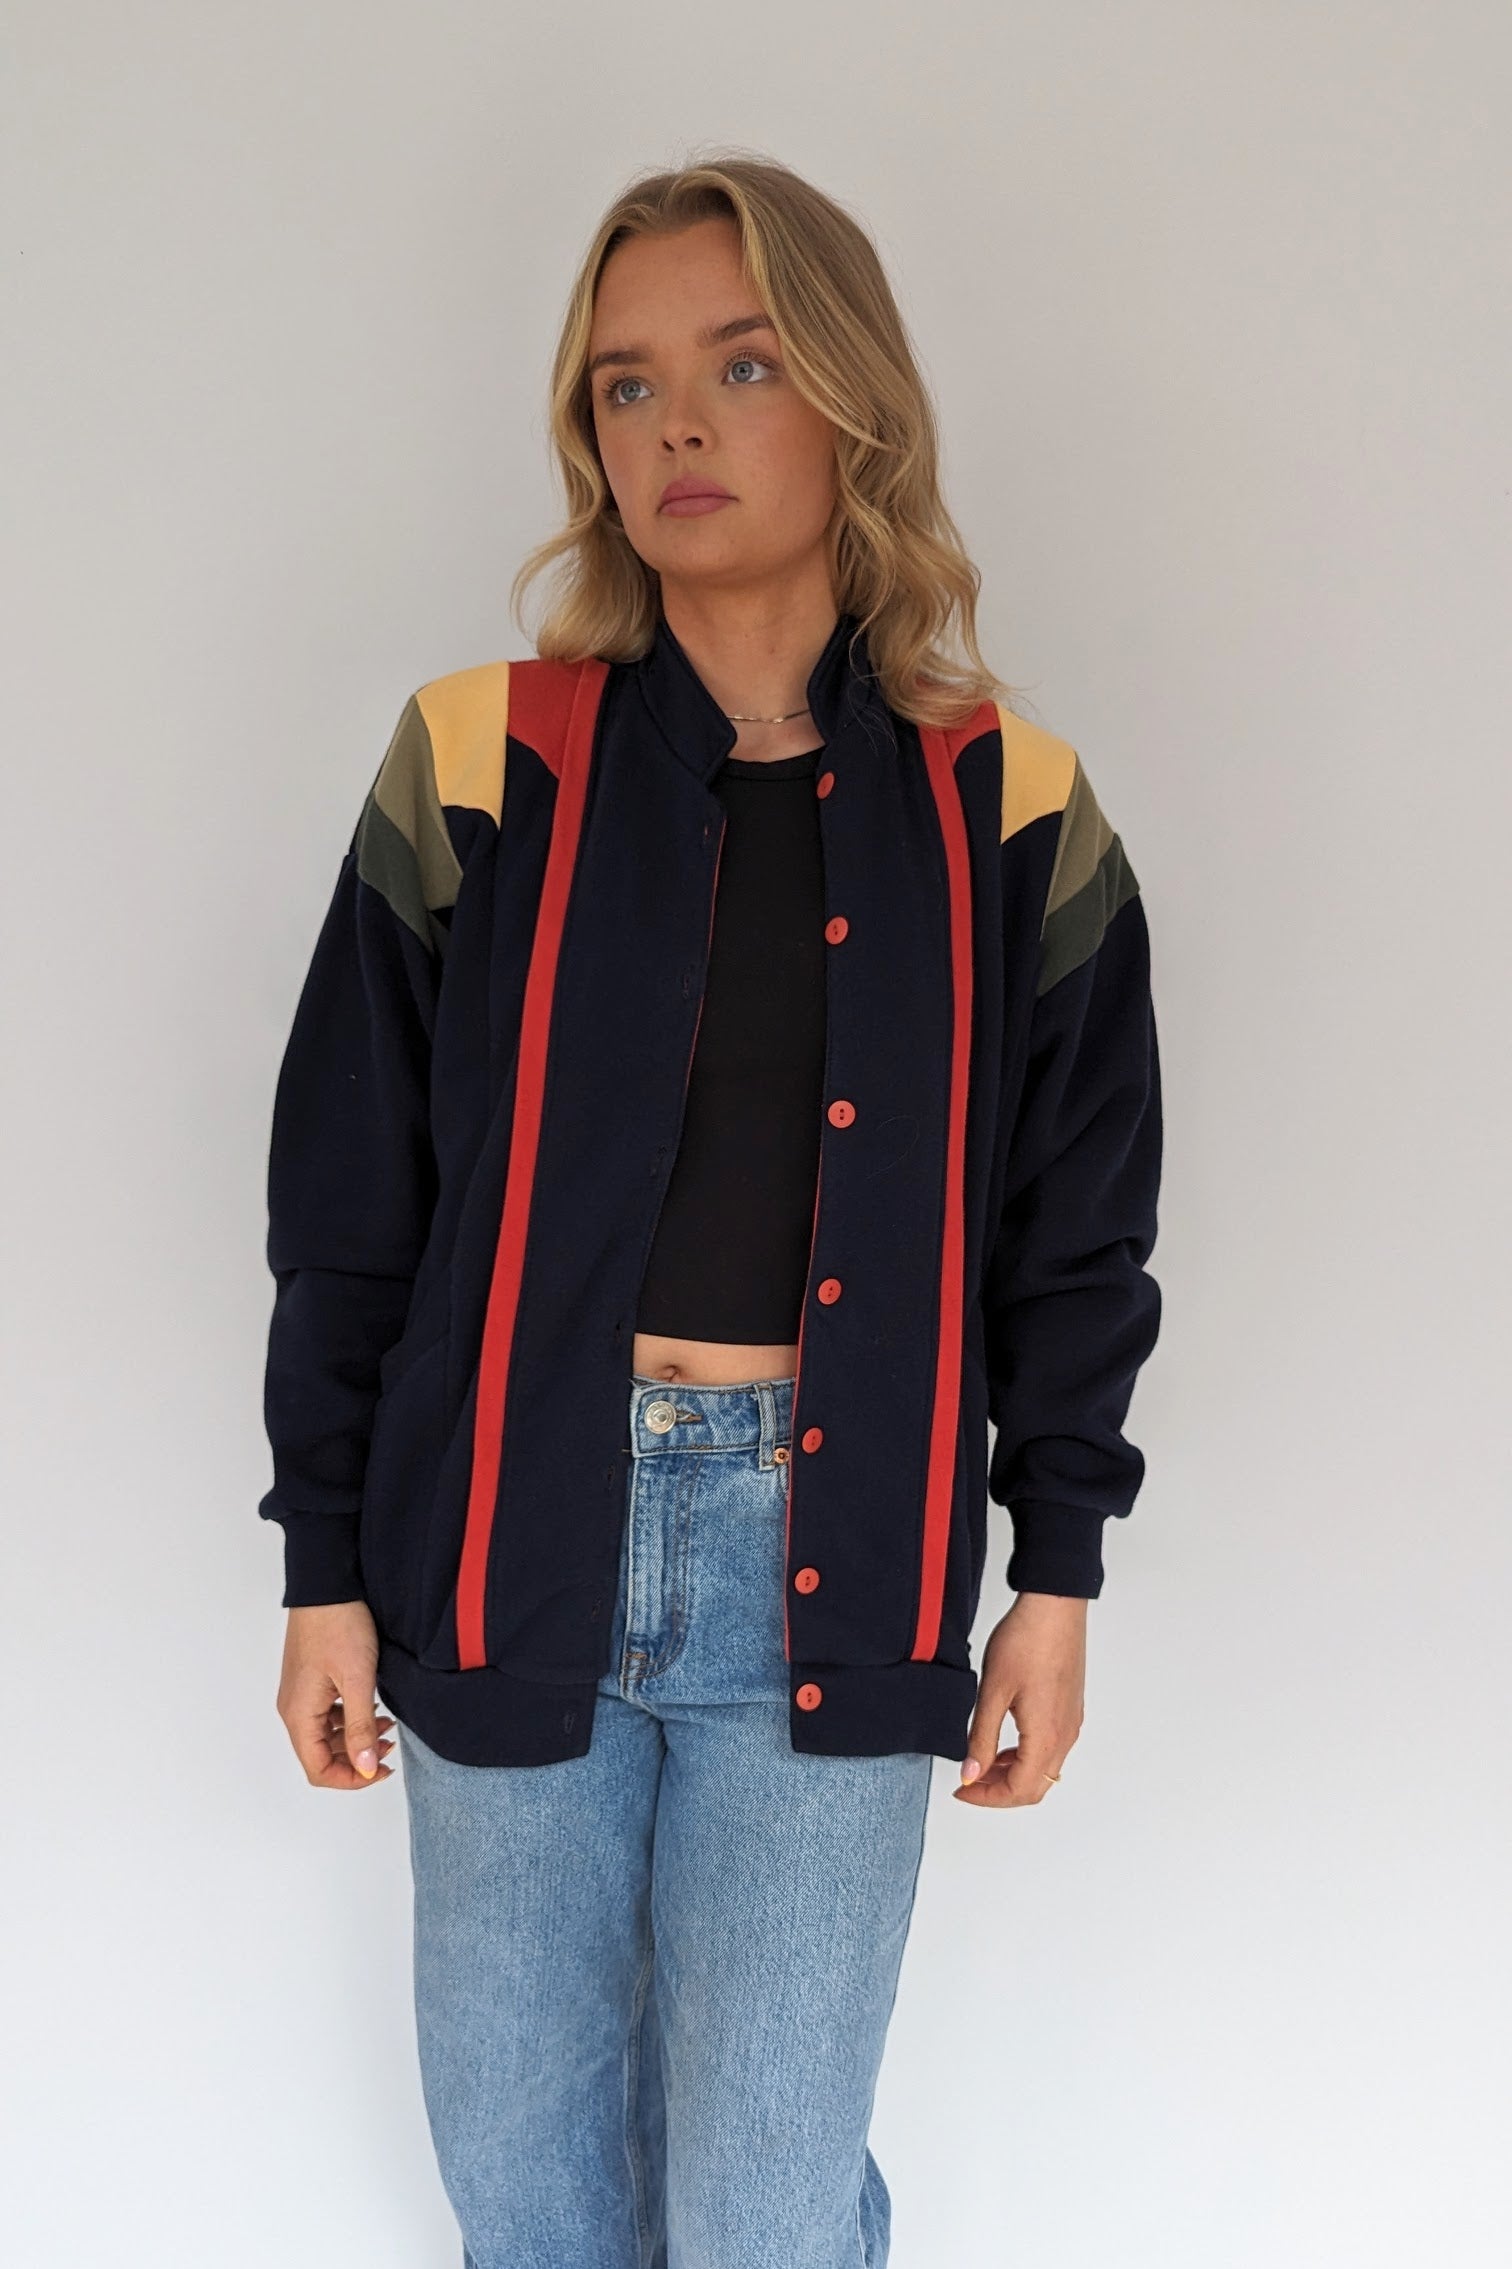 vintage retro jersey cardigan in blue with red, yellow and green panelling 